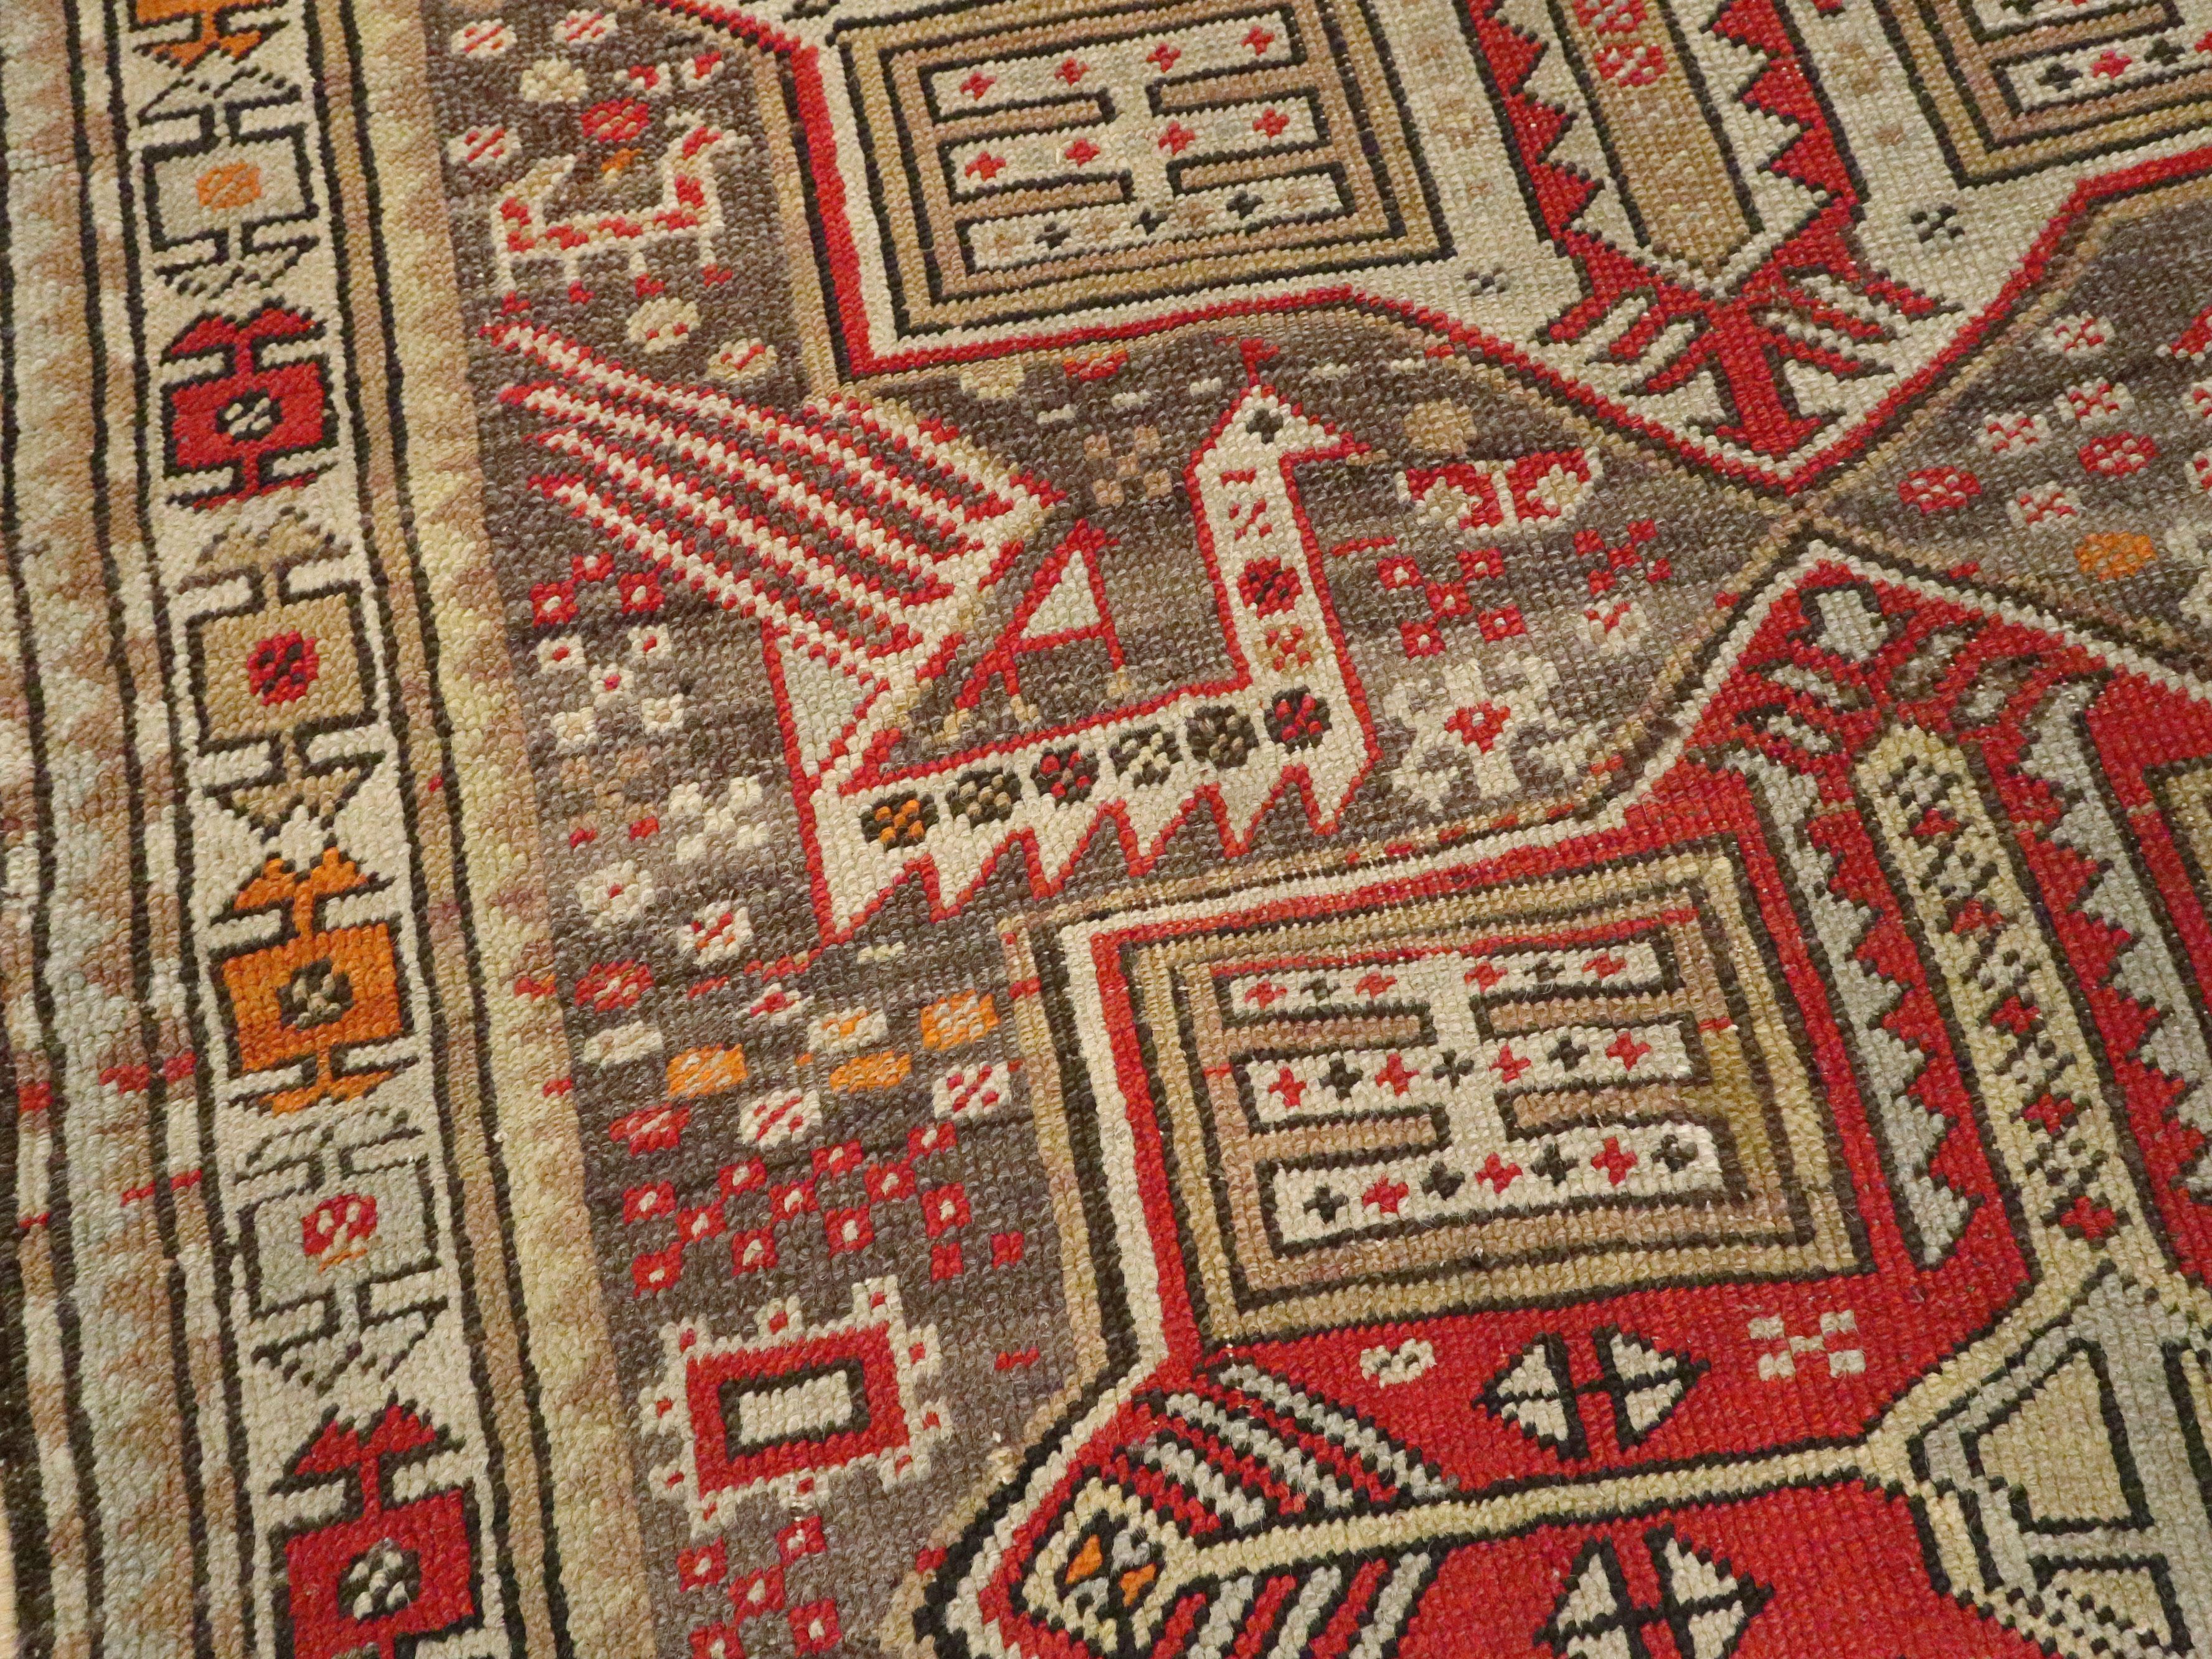 20th Century Small Handmade Caucasian Tribal Rug In Shades of Grey-Brown and Red